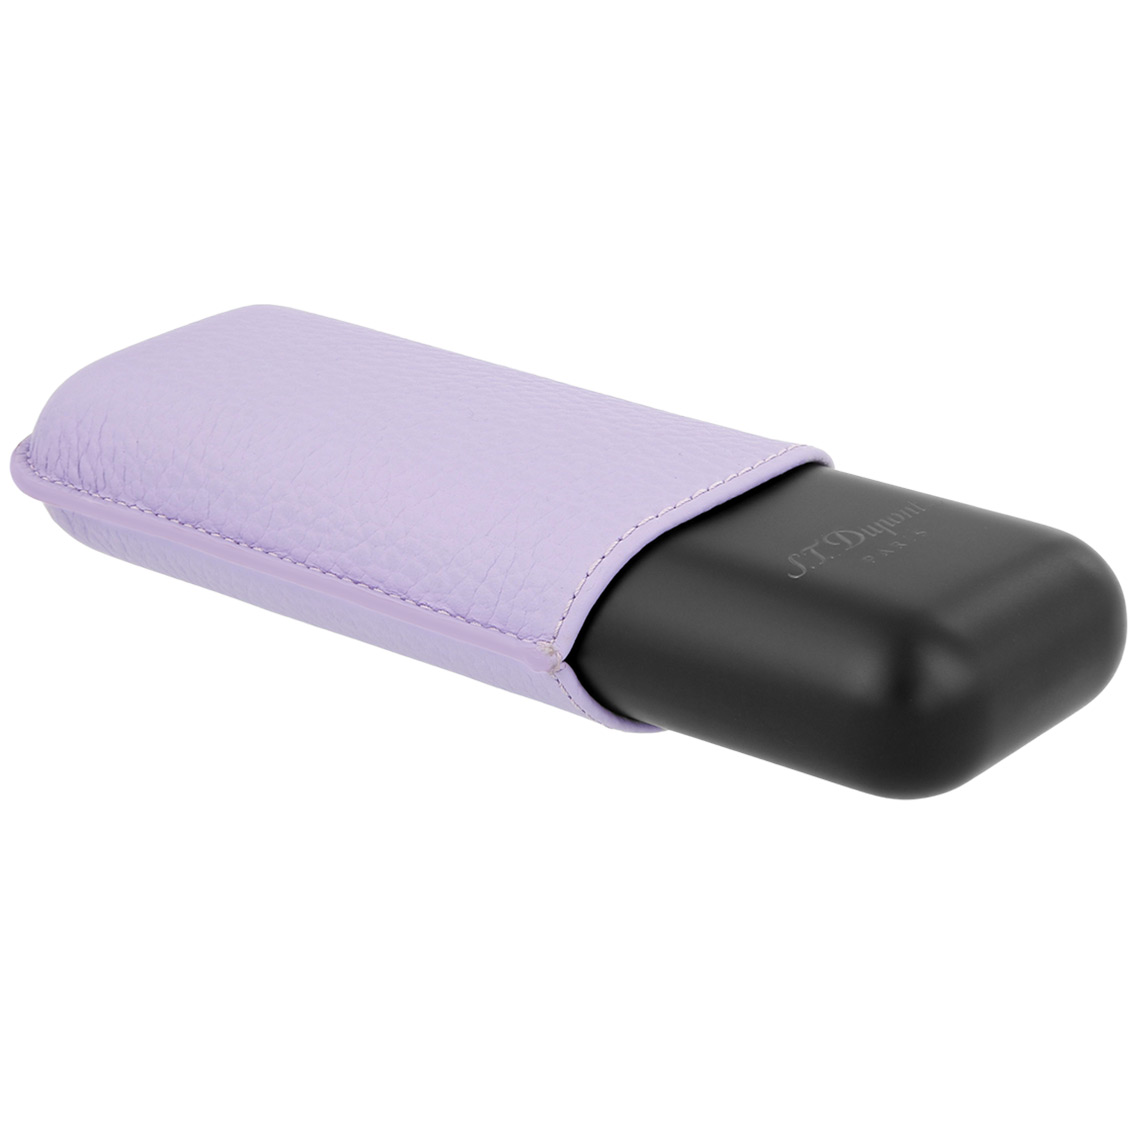 MATT BLACK AND LILAC CASE FOR 2 CIGARS